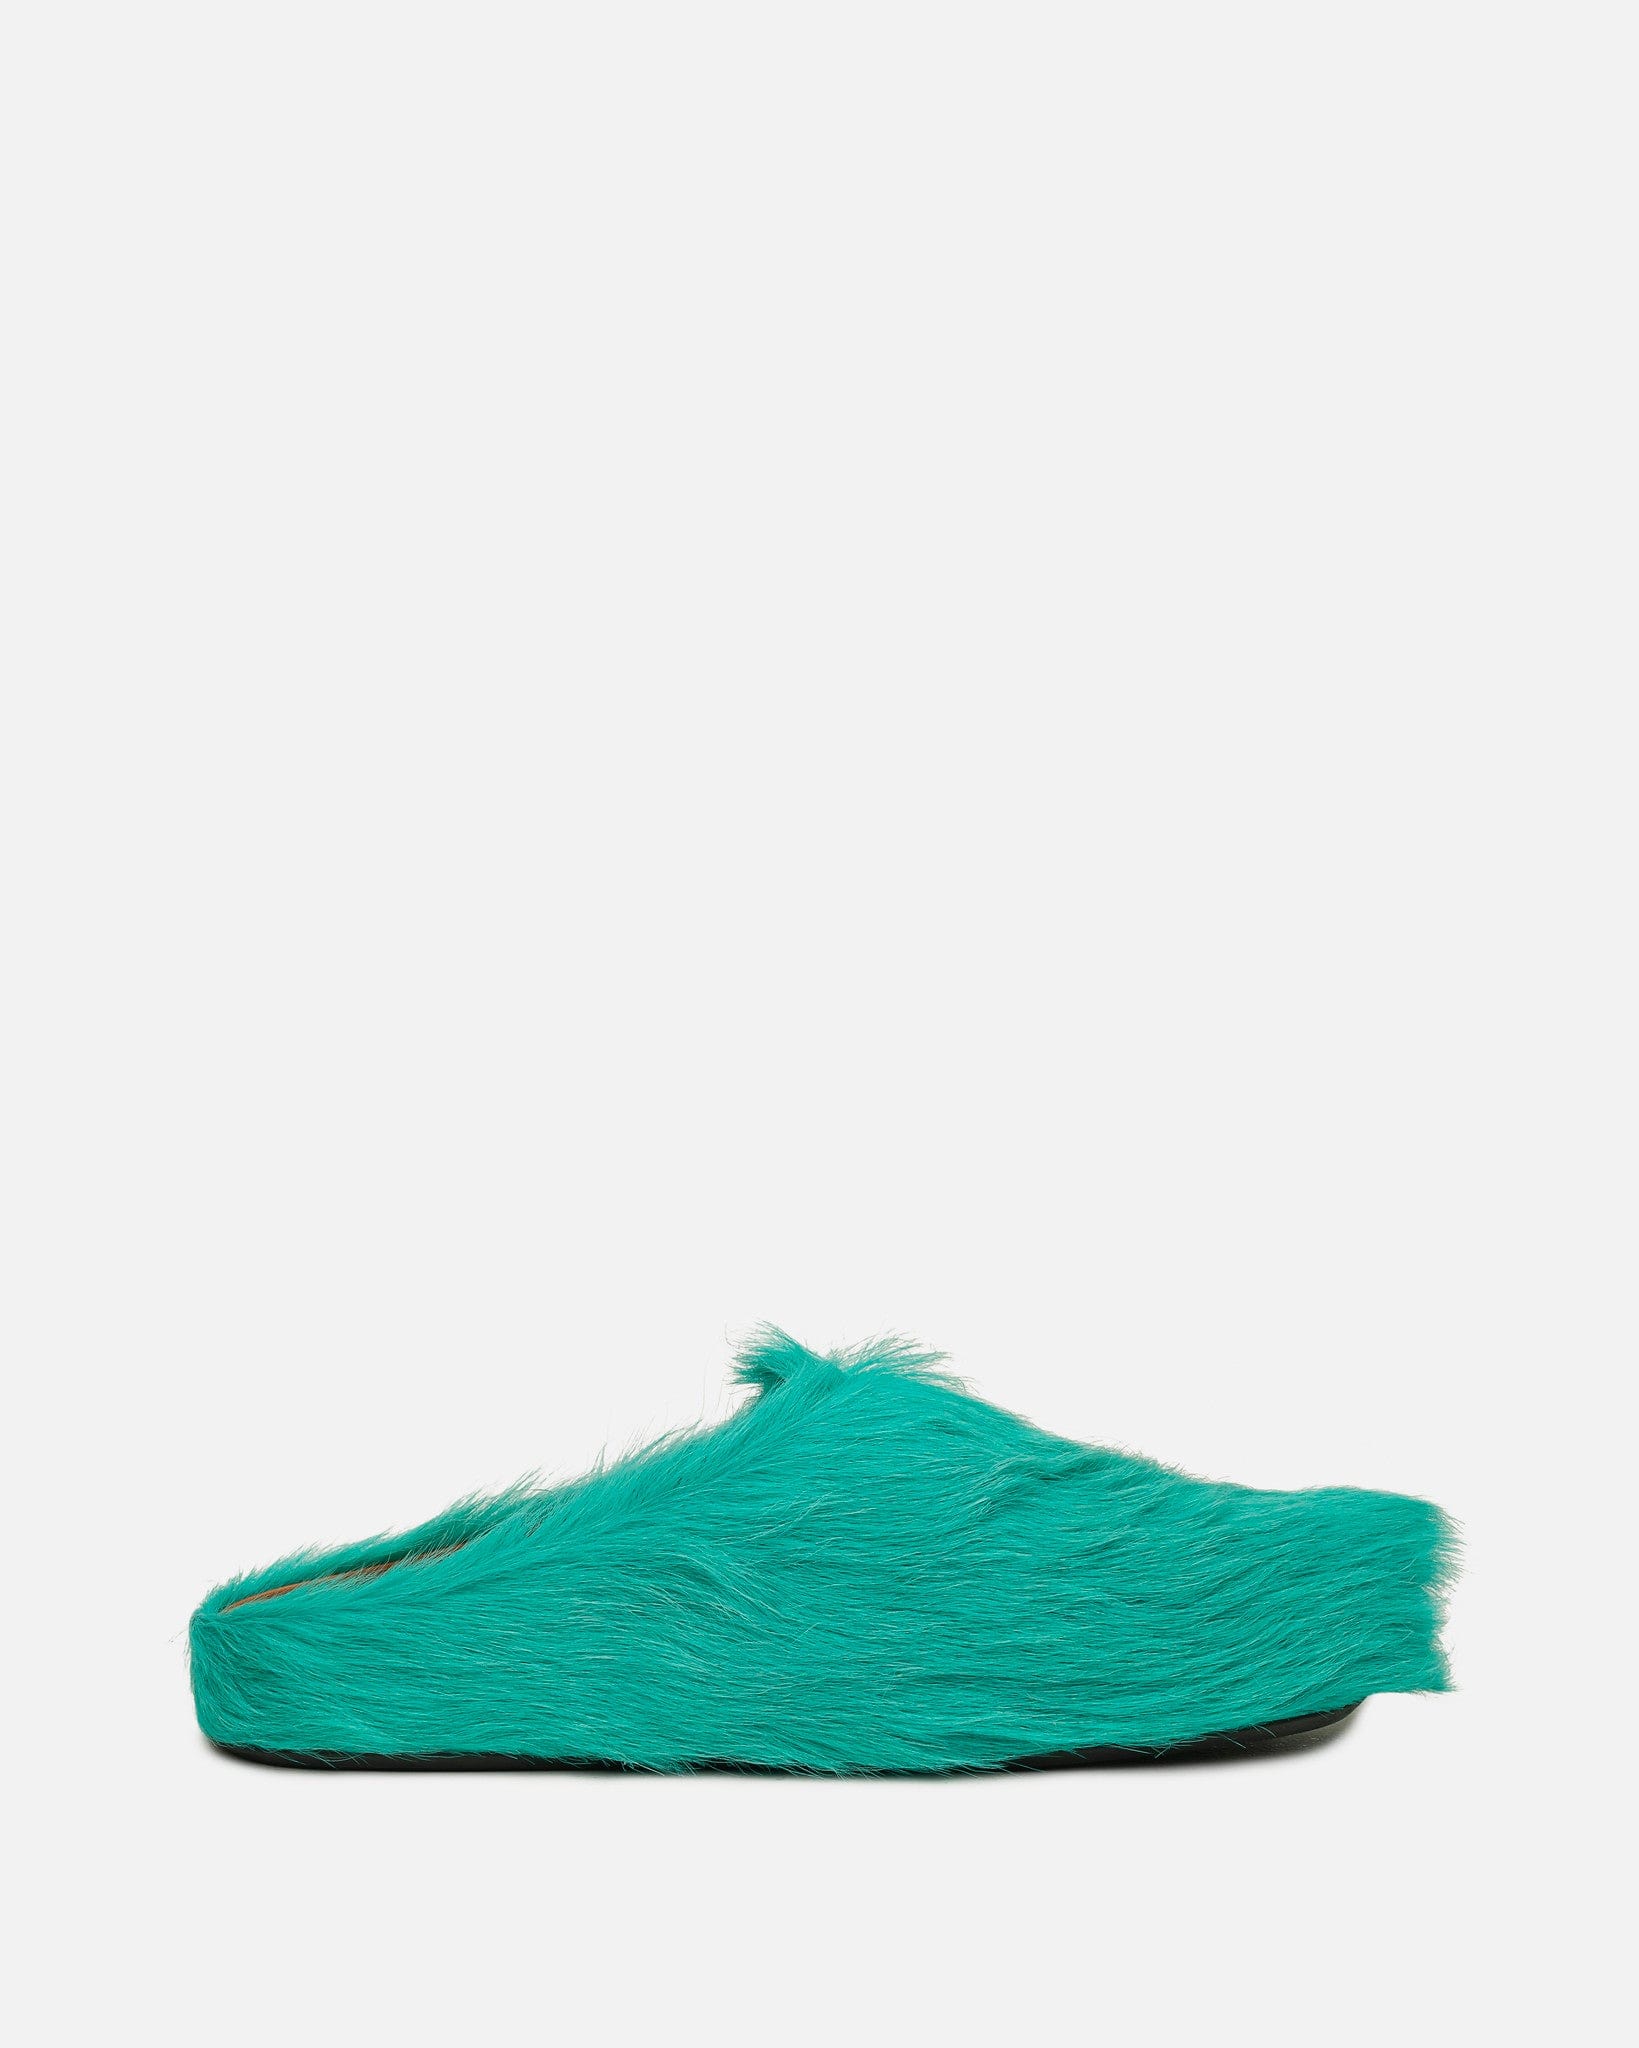 Marni Men's Shoes Calf-Hair Sabot in Turquoise